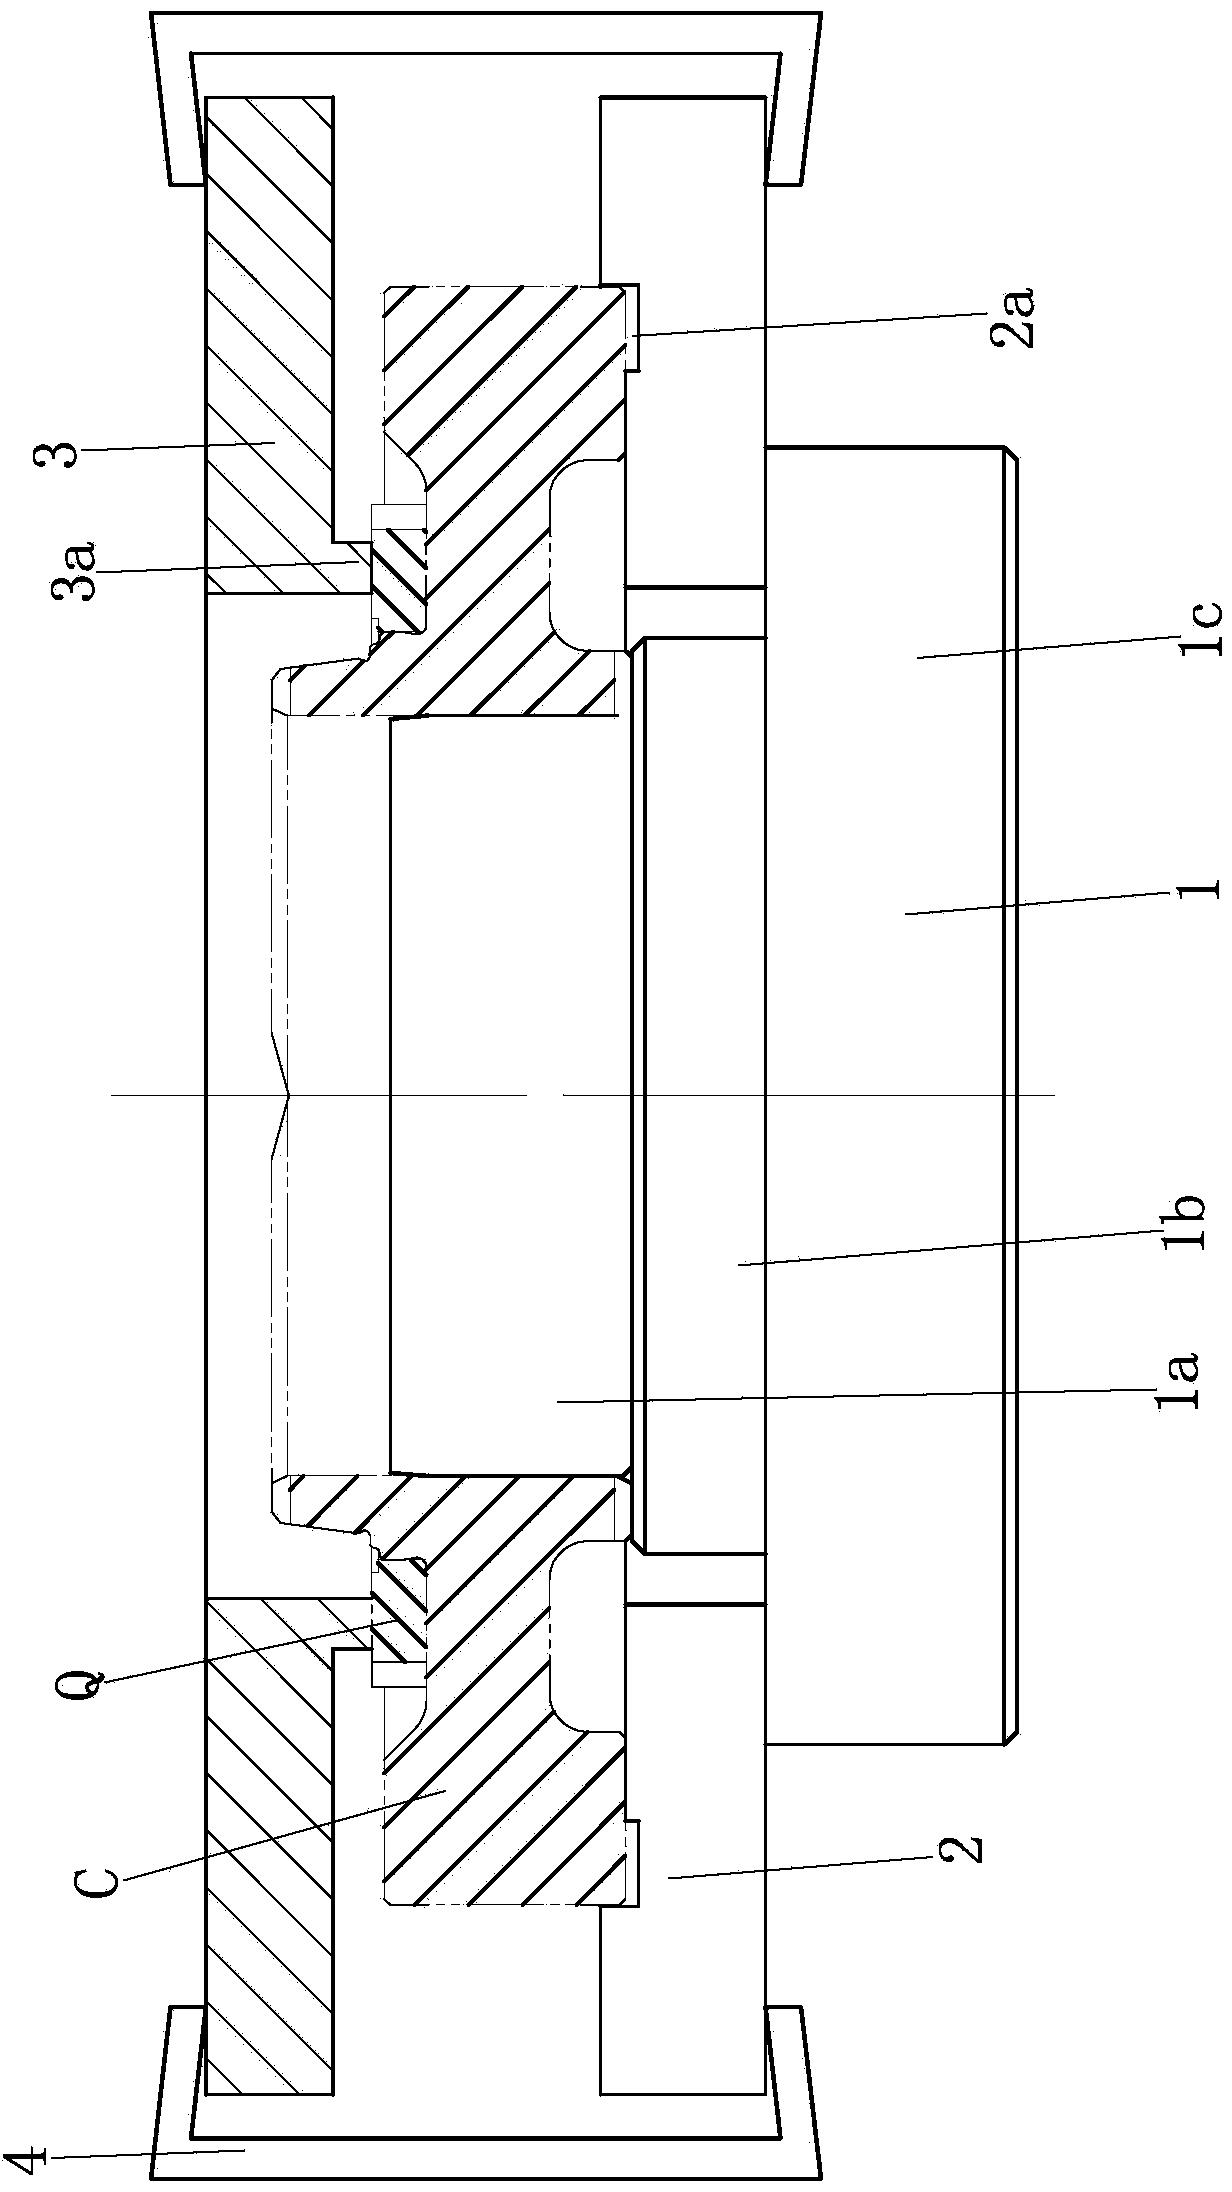 Welding positioning device